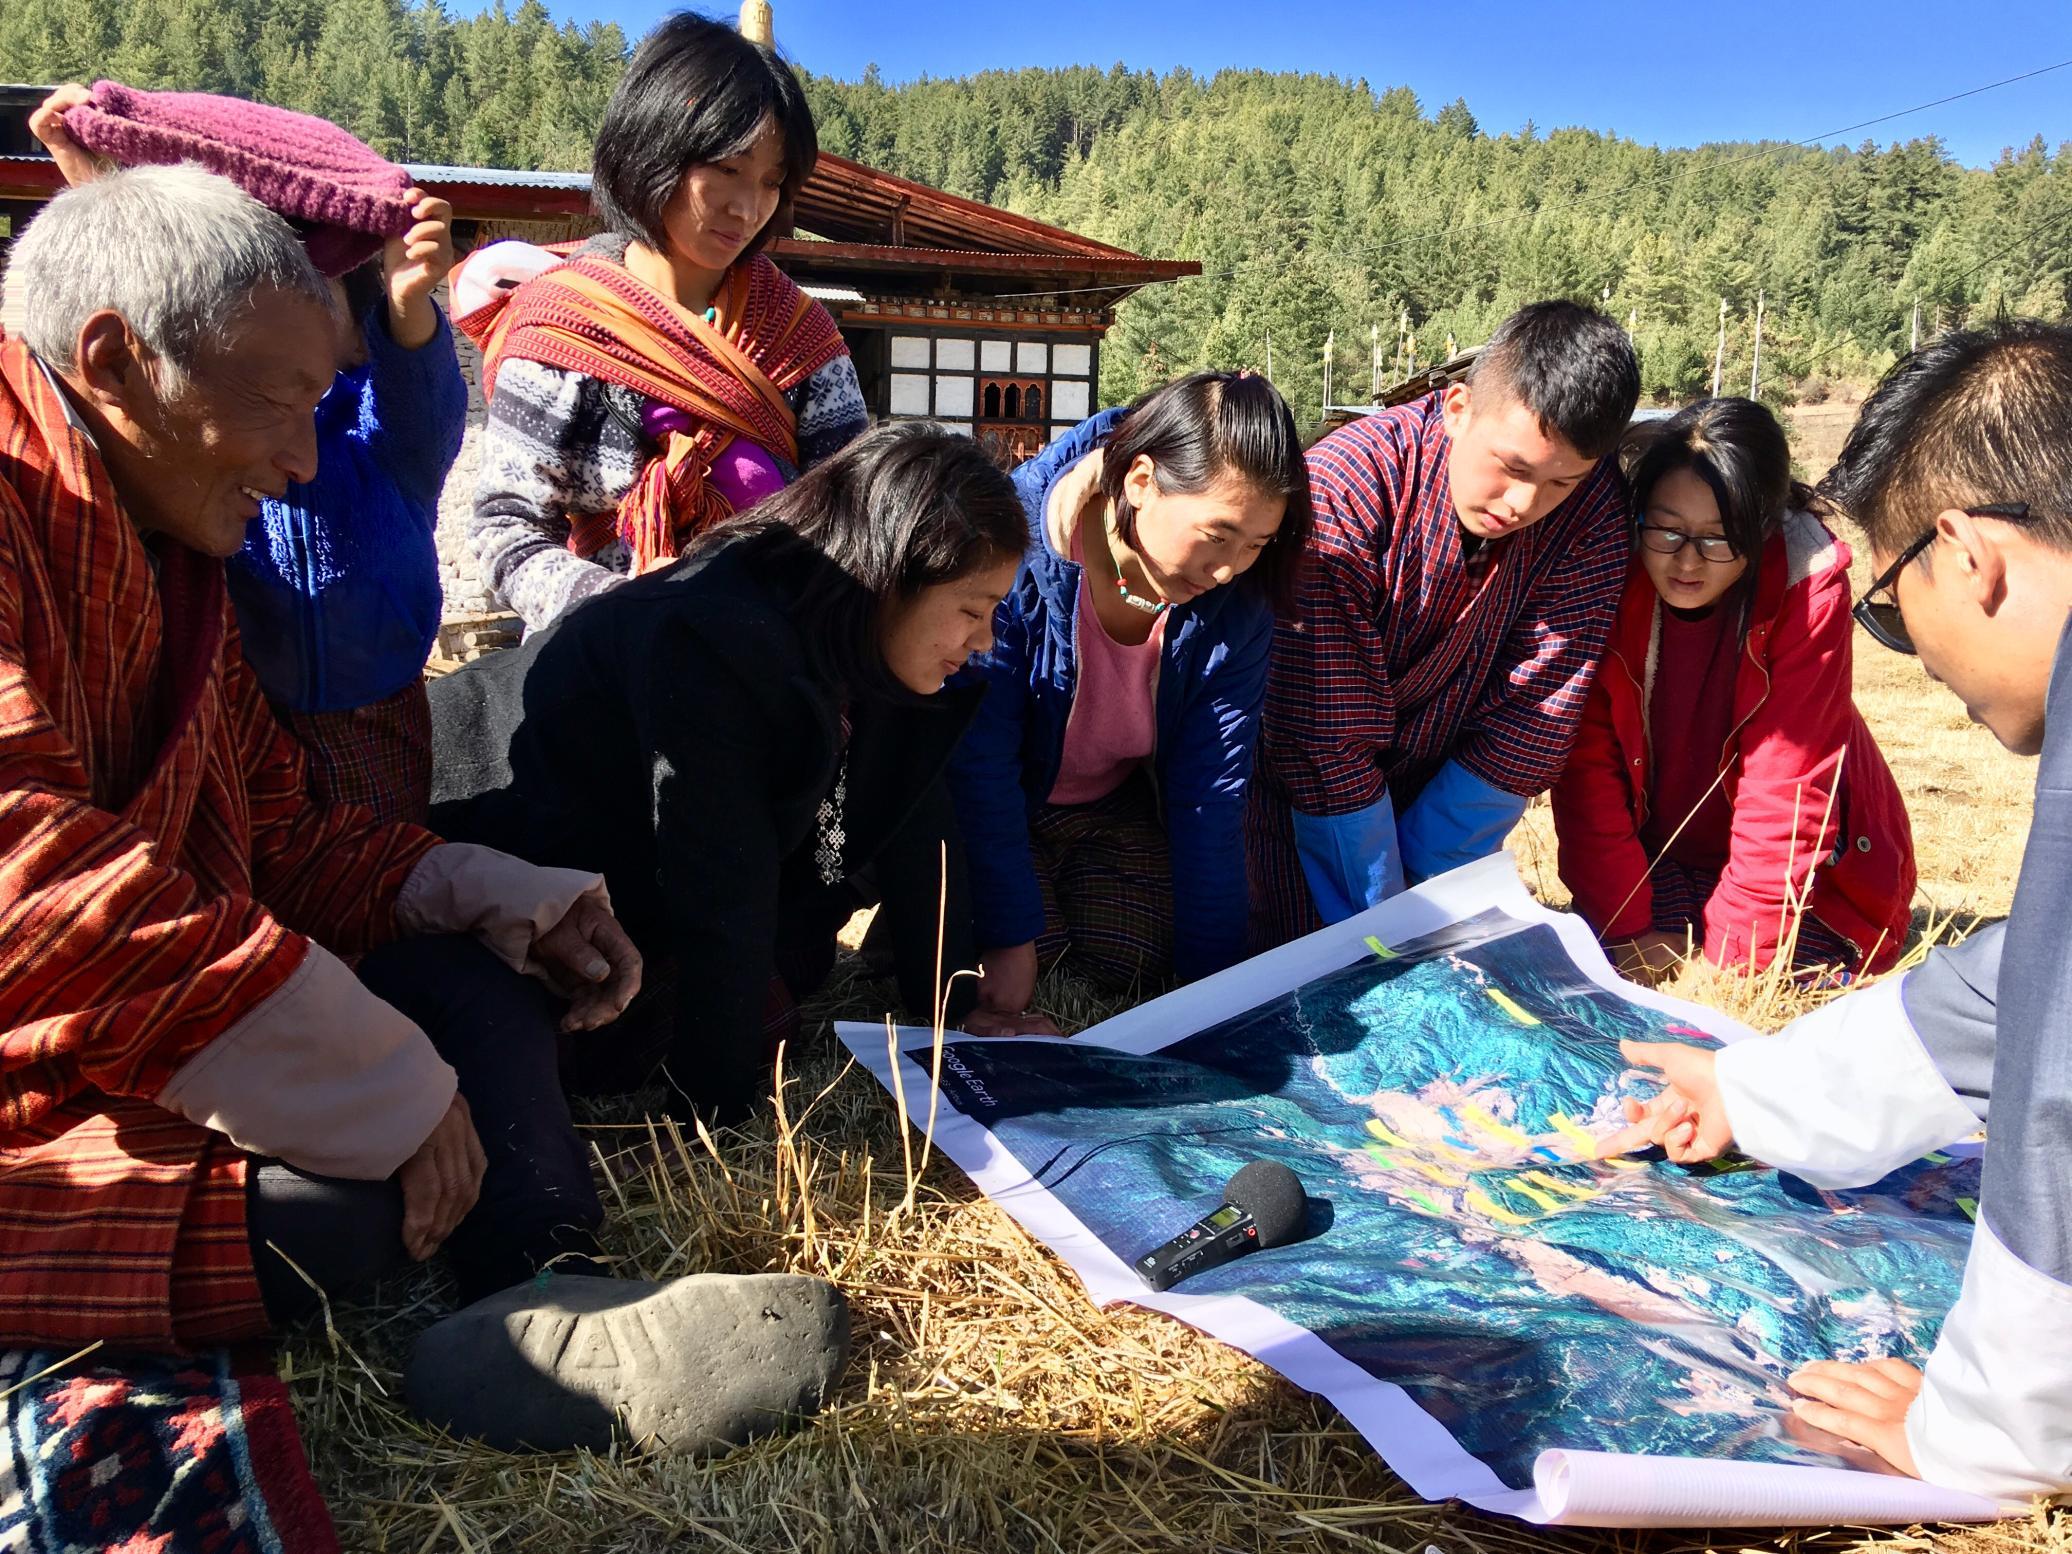 "One of the methods we use in our research is participatory mapping, which can frequently foster cross-generational conversations and generate opportunities to foreground the spatial knowledge of local communities. One thing I love about cultural anthropology is forging connections between different ecological, cultural, & linguistic worlds." -David Hecht